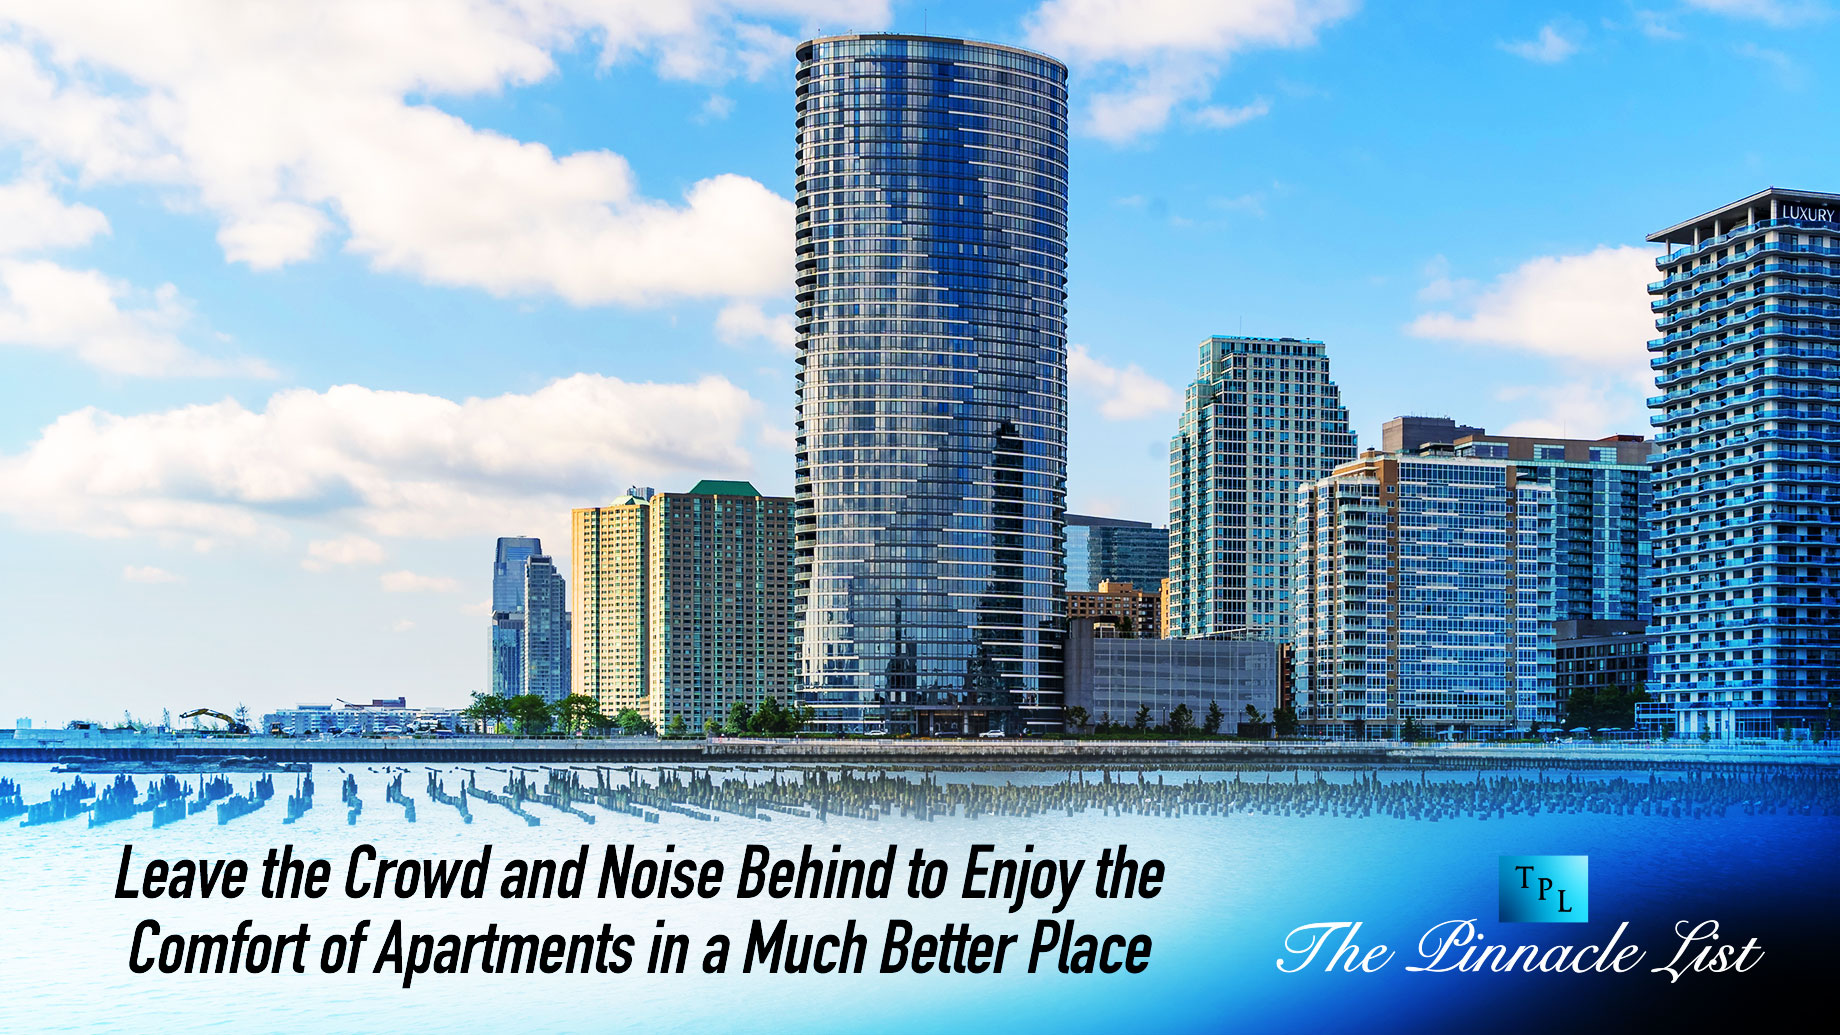 Leave the Crowd and Noise Behind to Enjoy the Comfort of Apartments in a Much Better Place